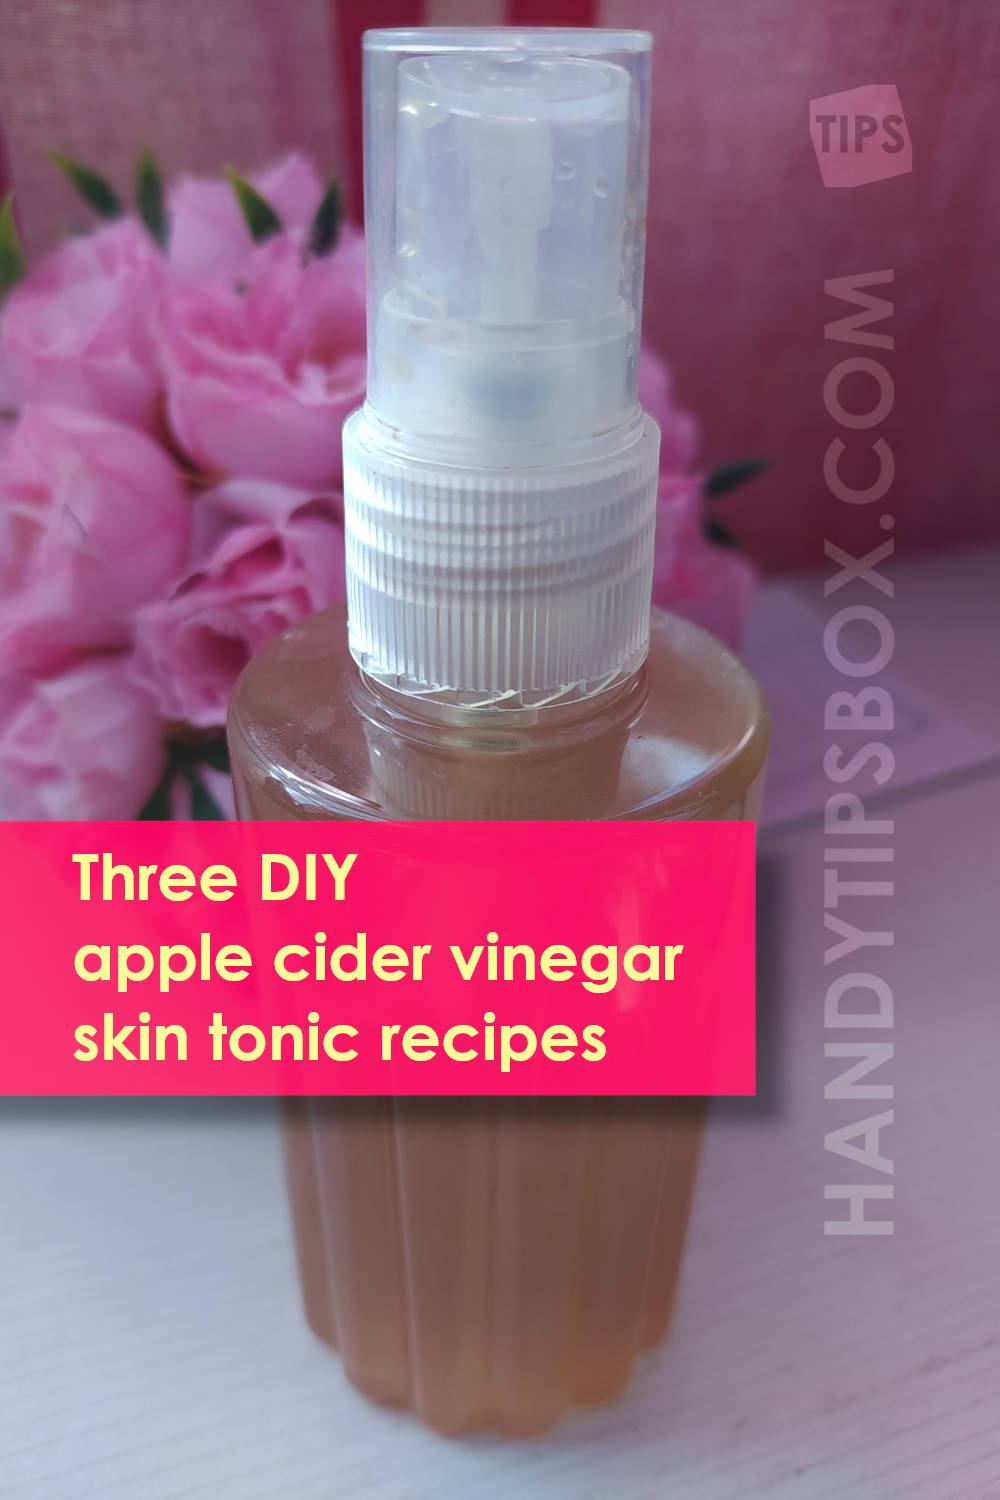 Three DIY apple cider vinegar skin tonic recipes. Ready tonic in the bottle with spray. Vertical image.